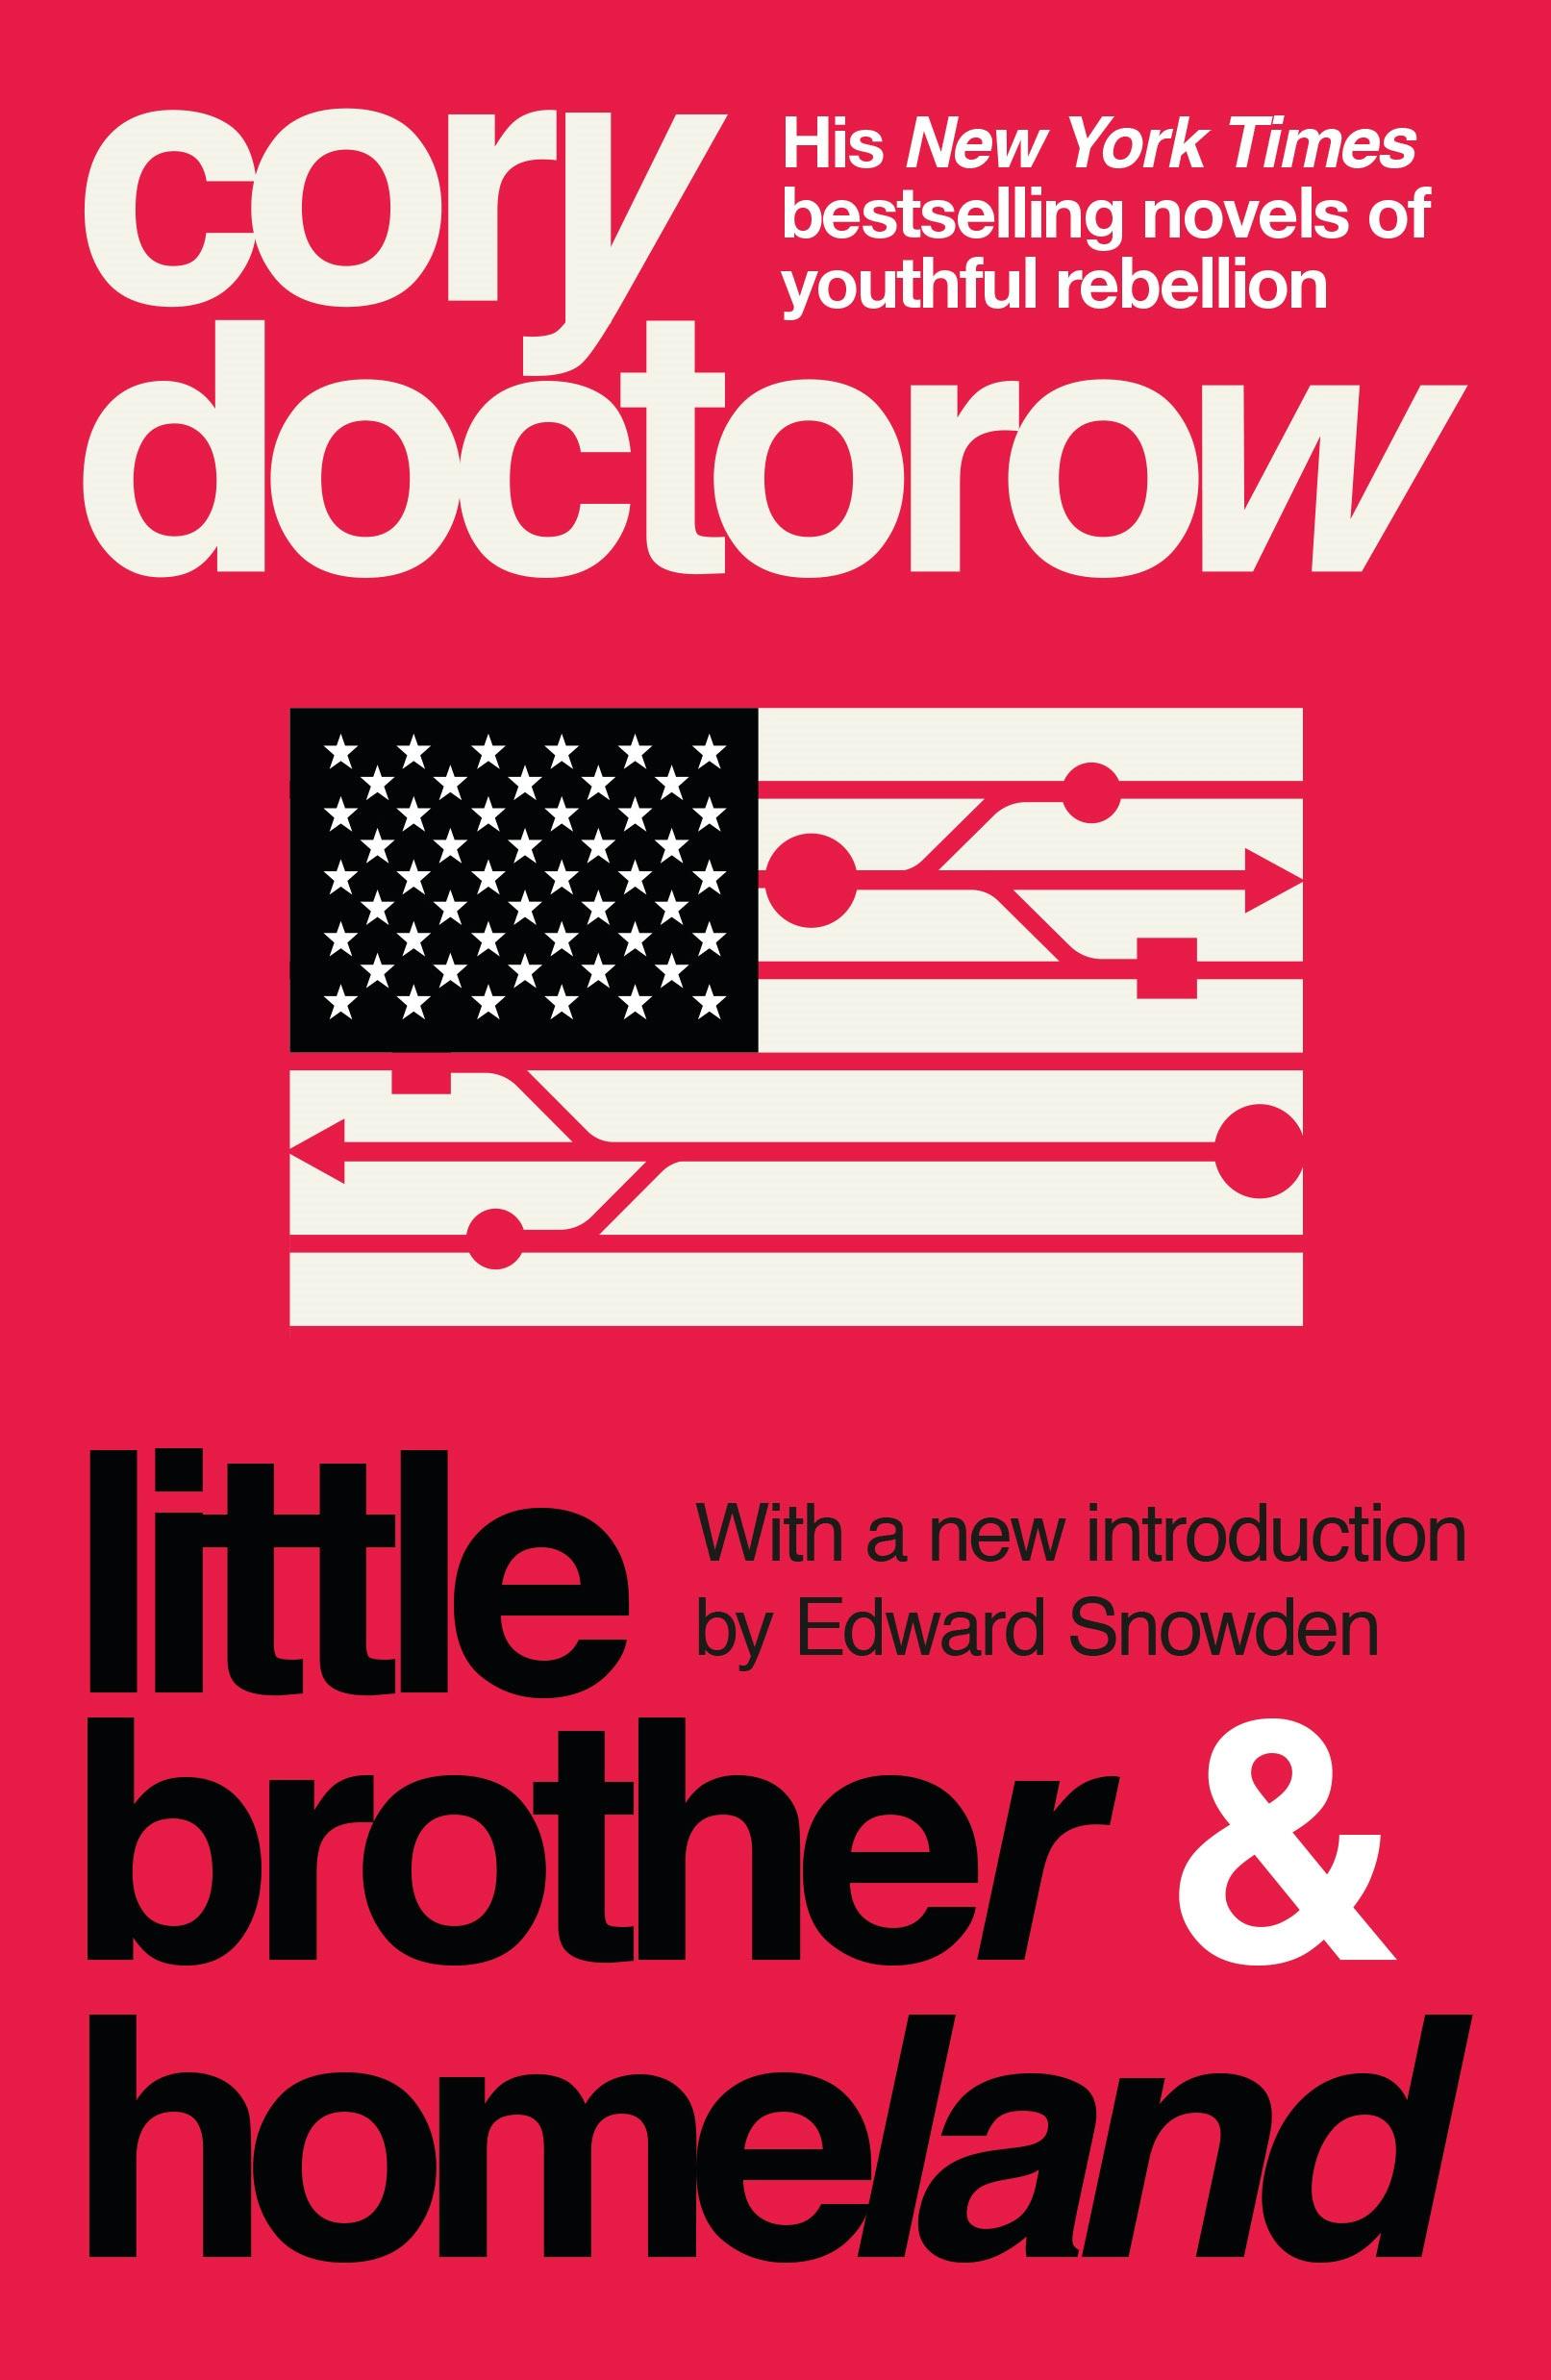 Cover for the book titled as: Little Brother & Homeland